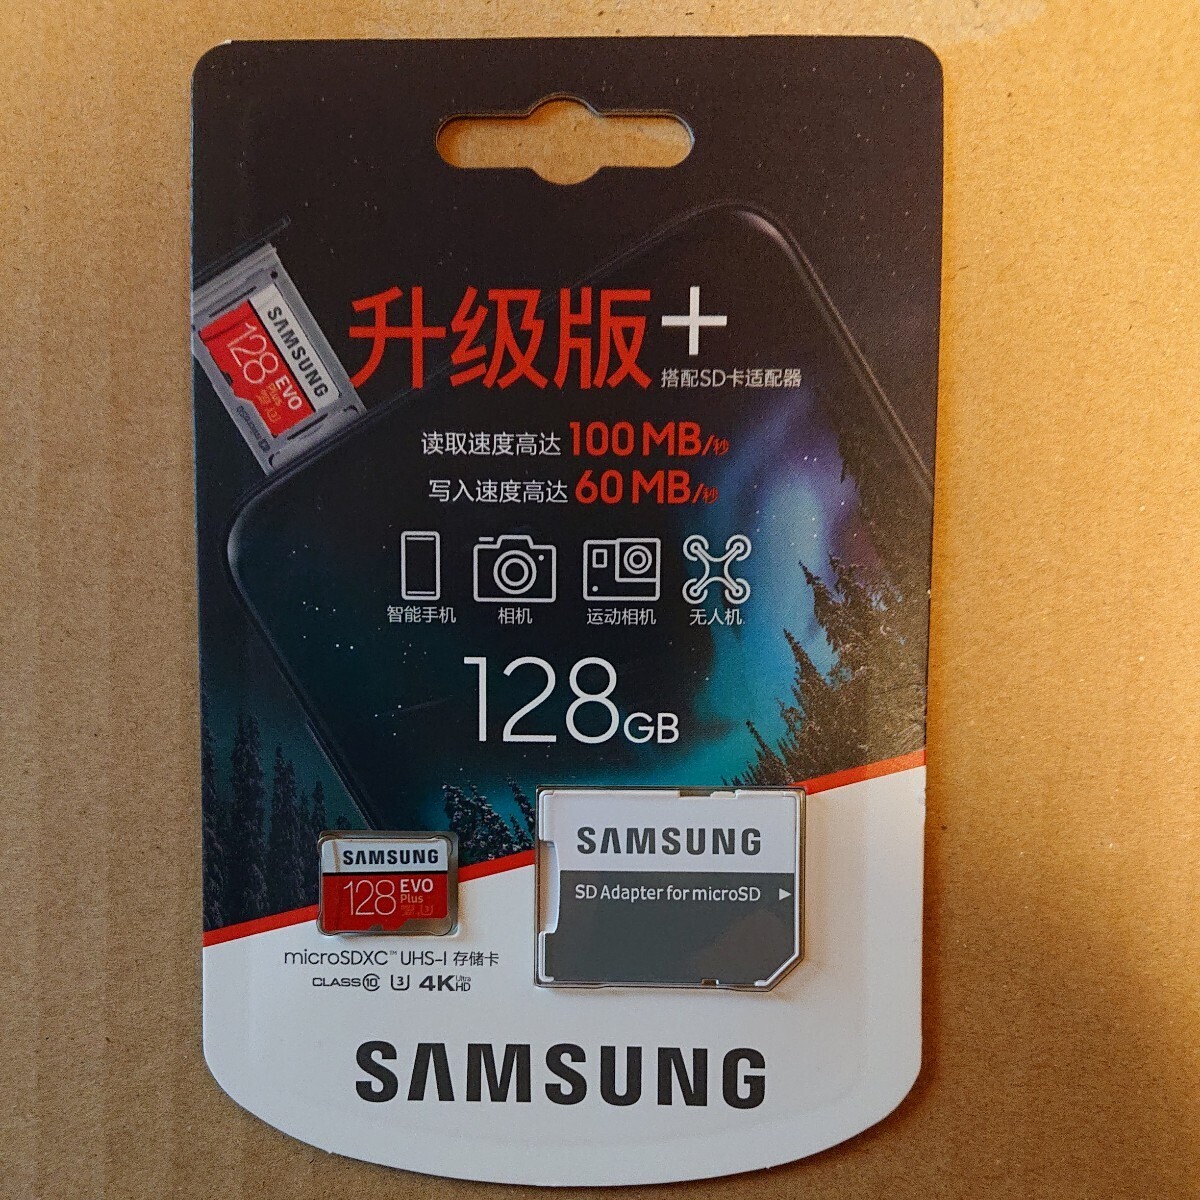 SAMSUNG microSD card SD adaptor attaching micro SD card SDXC unopened unused goods parallel imported goods Samsung 128GB